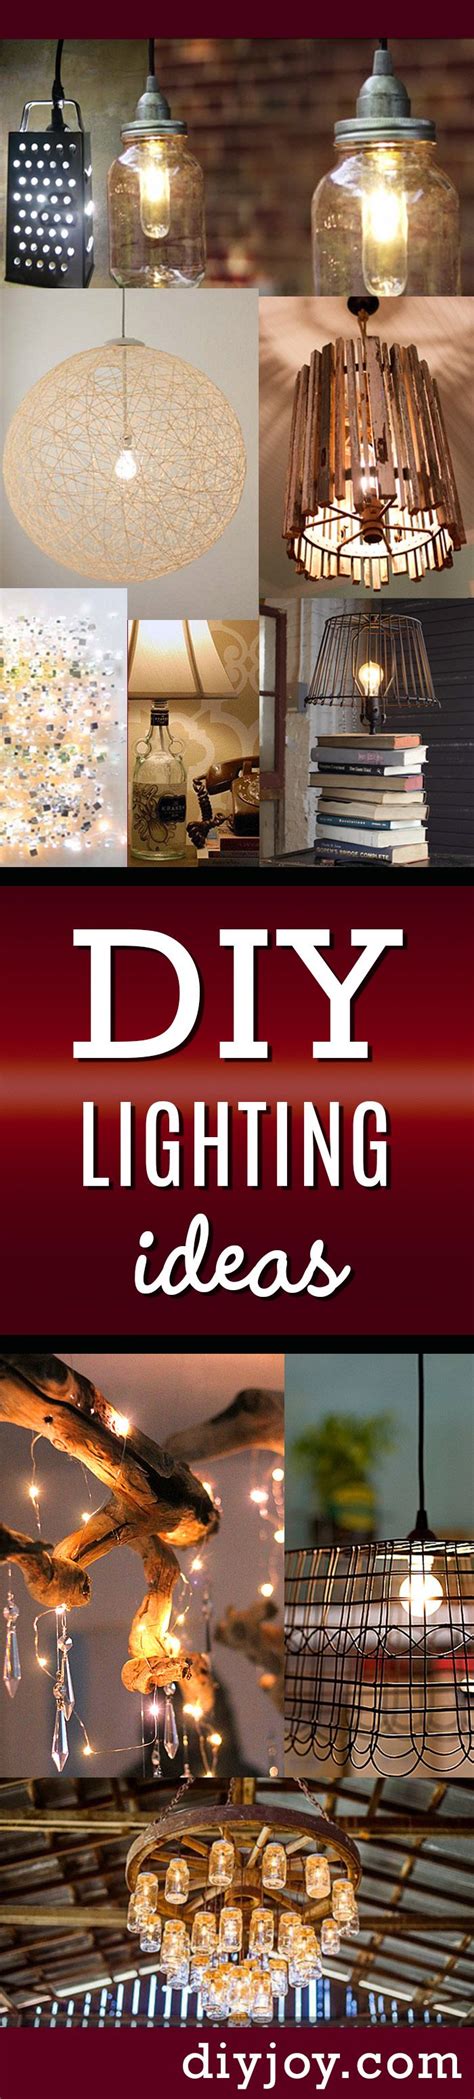 28 Dreamy Diy Lighting Projects Youll Adore Cool Diy Projects For